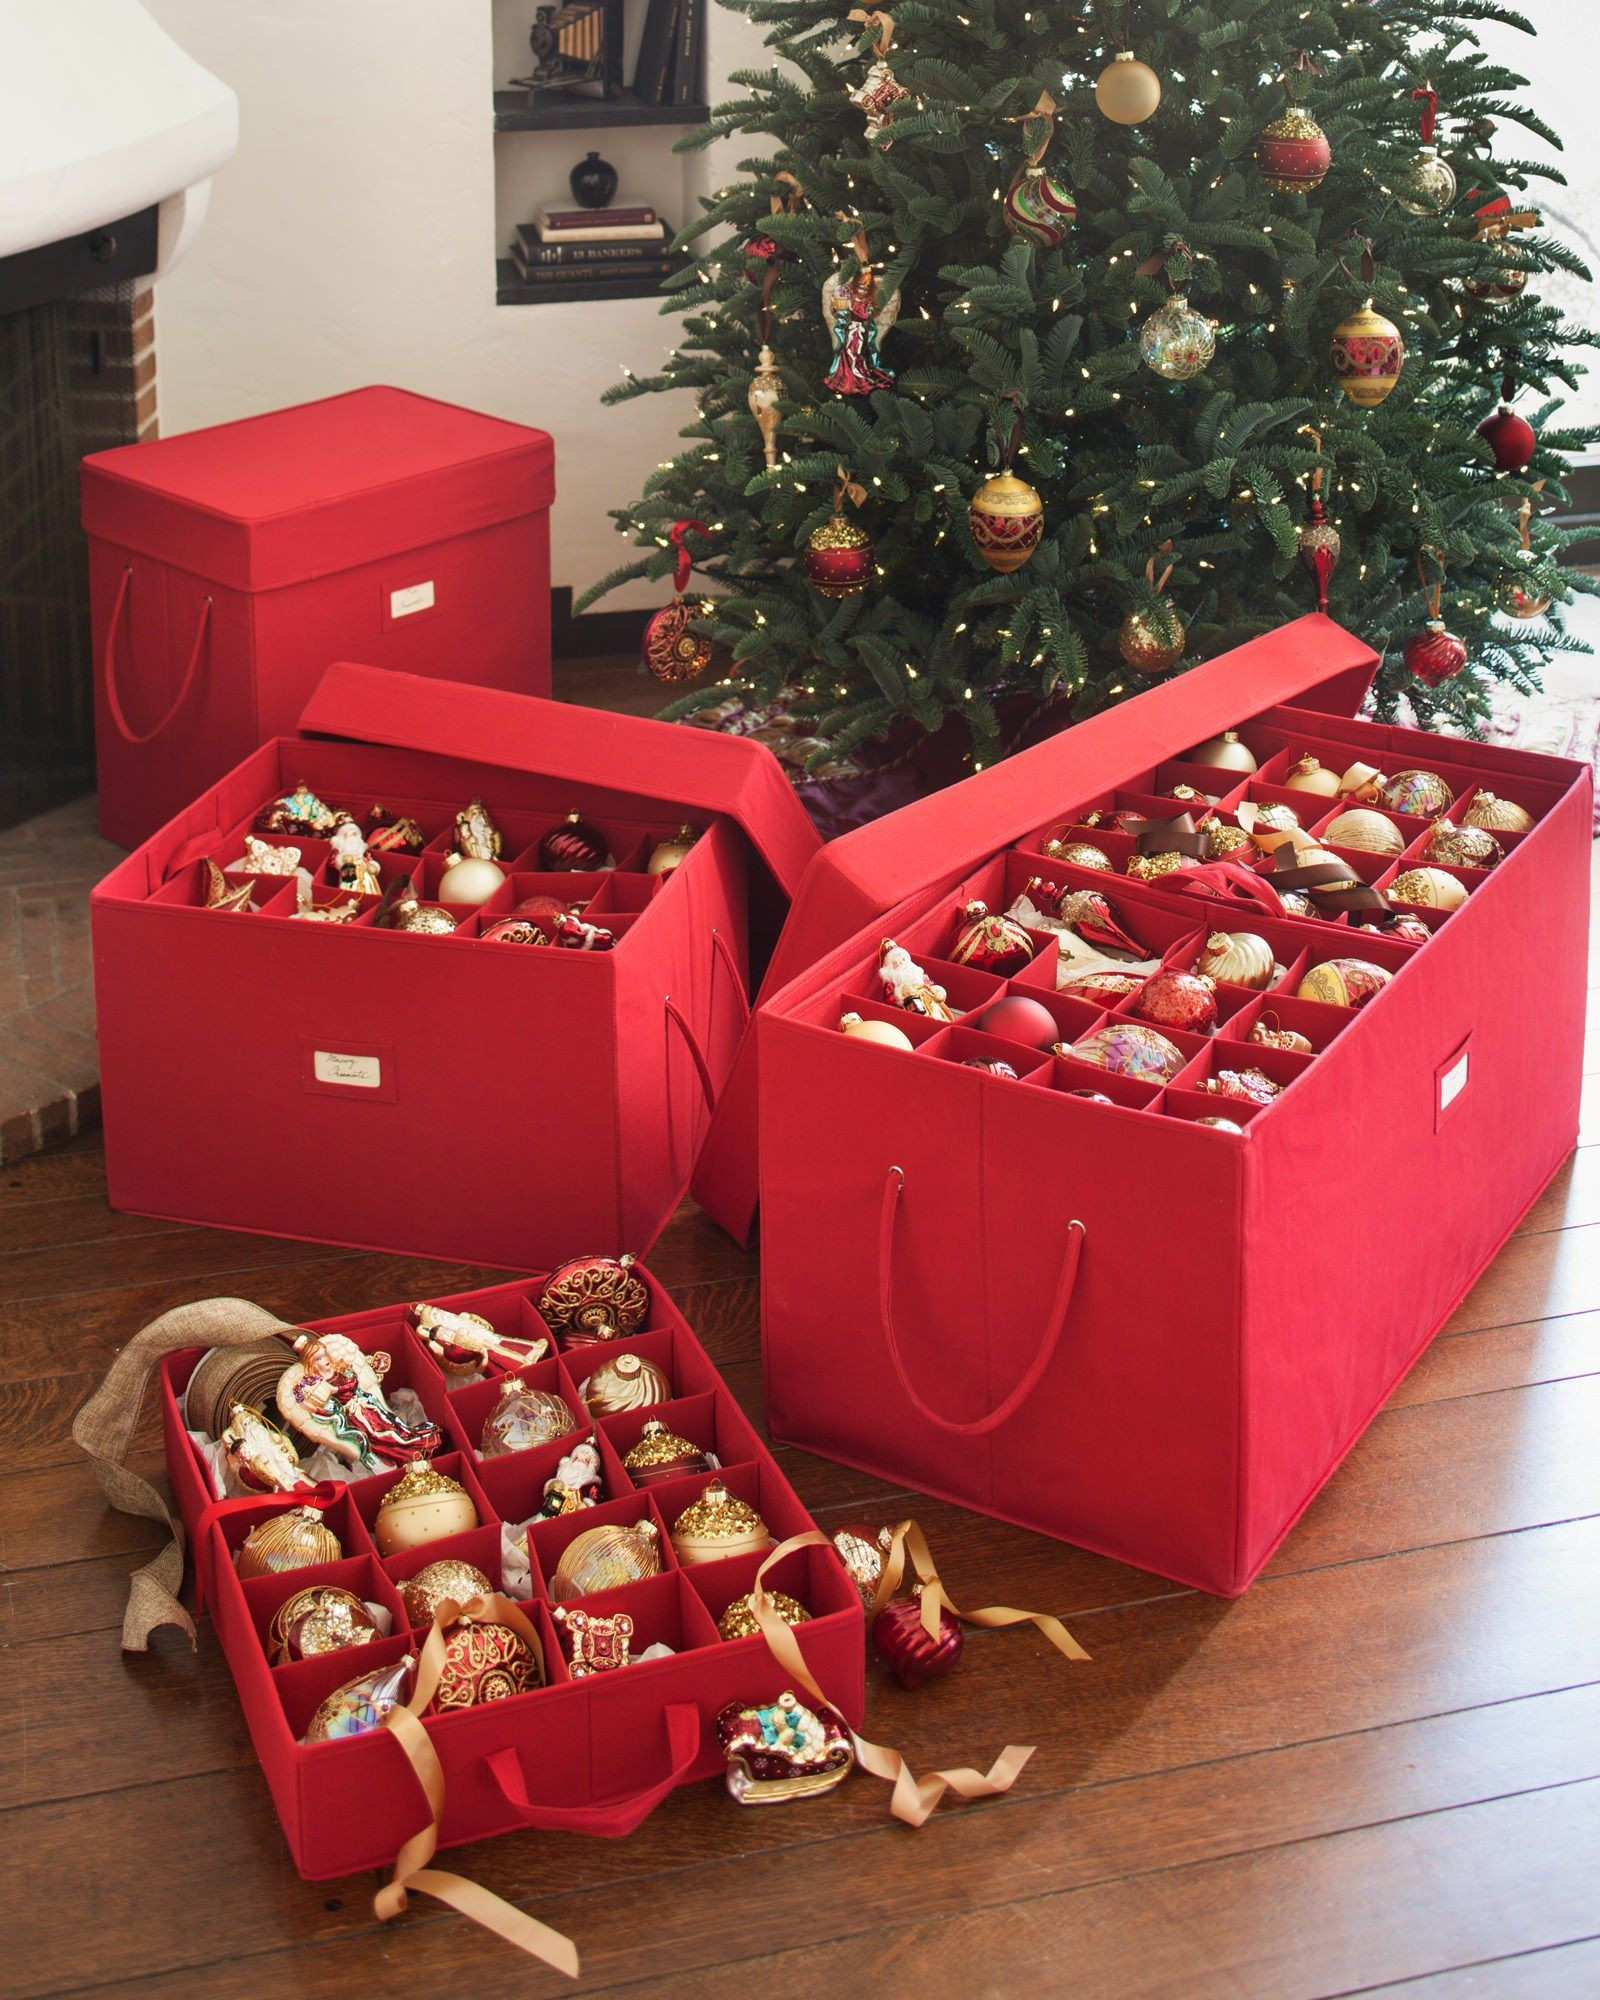 Christmas Tree Storage Containers
 Cleaning up after the holidays need not be stressful With